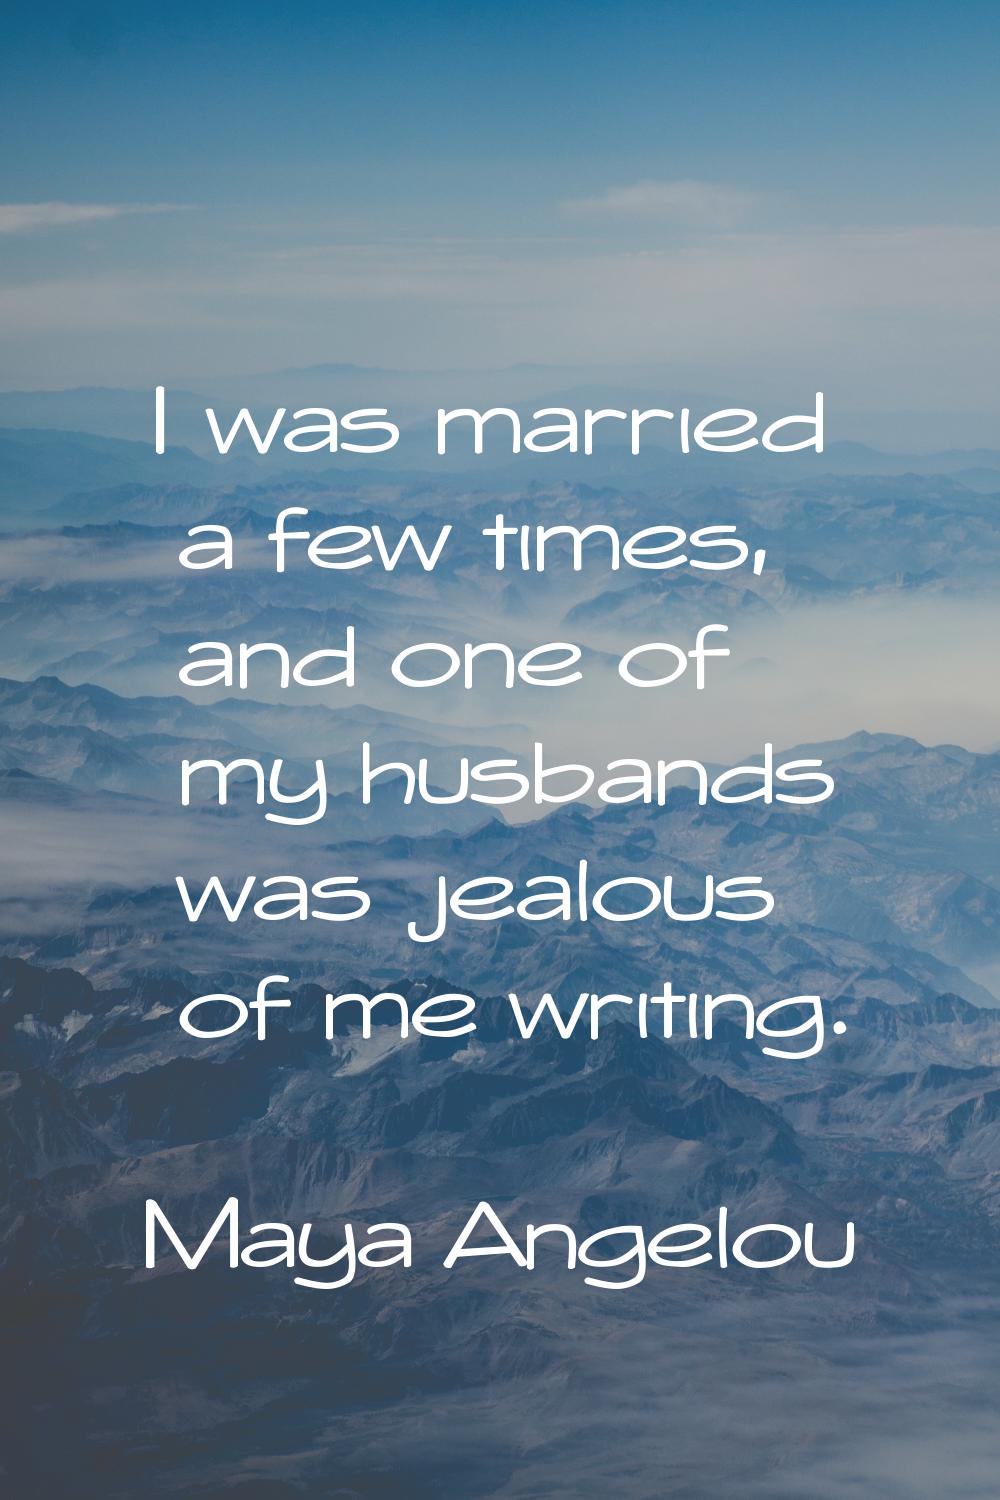 I was married a few times, and one of my husbands was jealous of me writing.